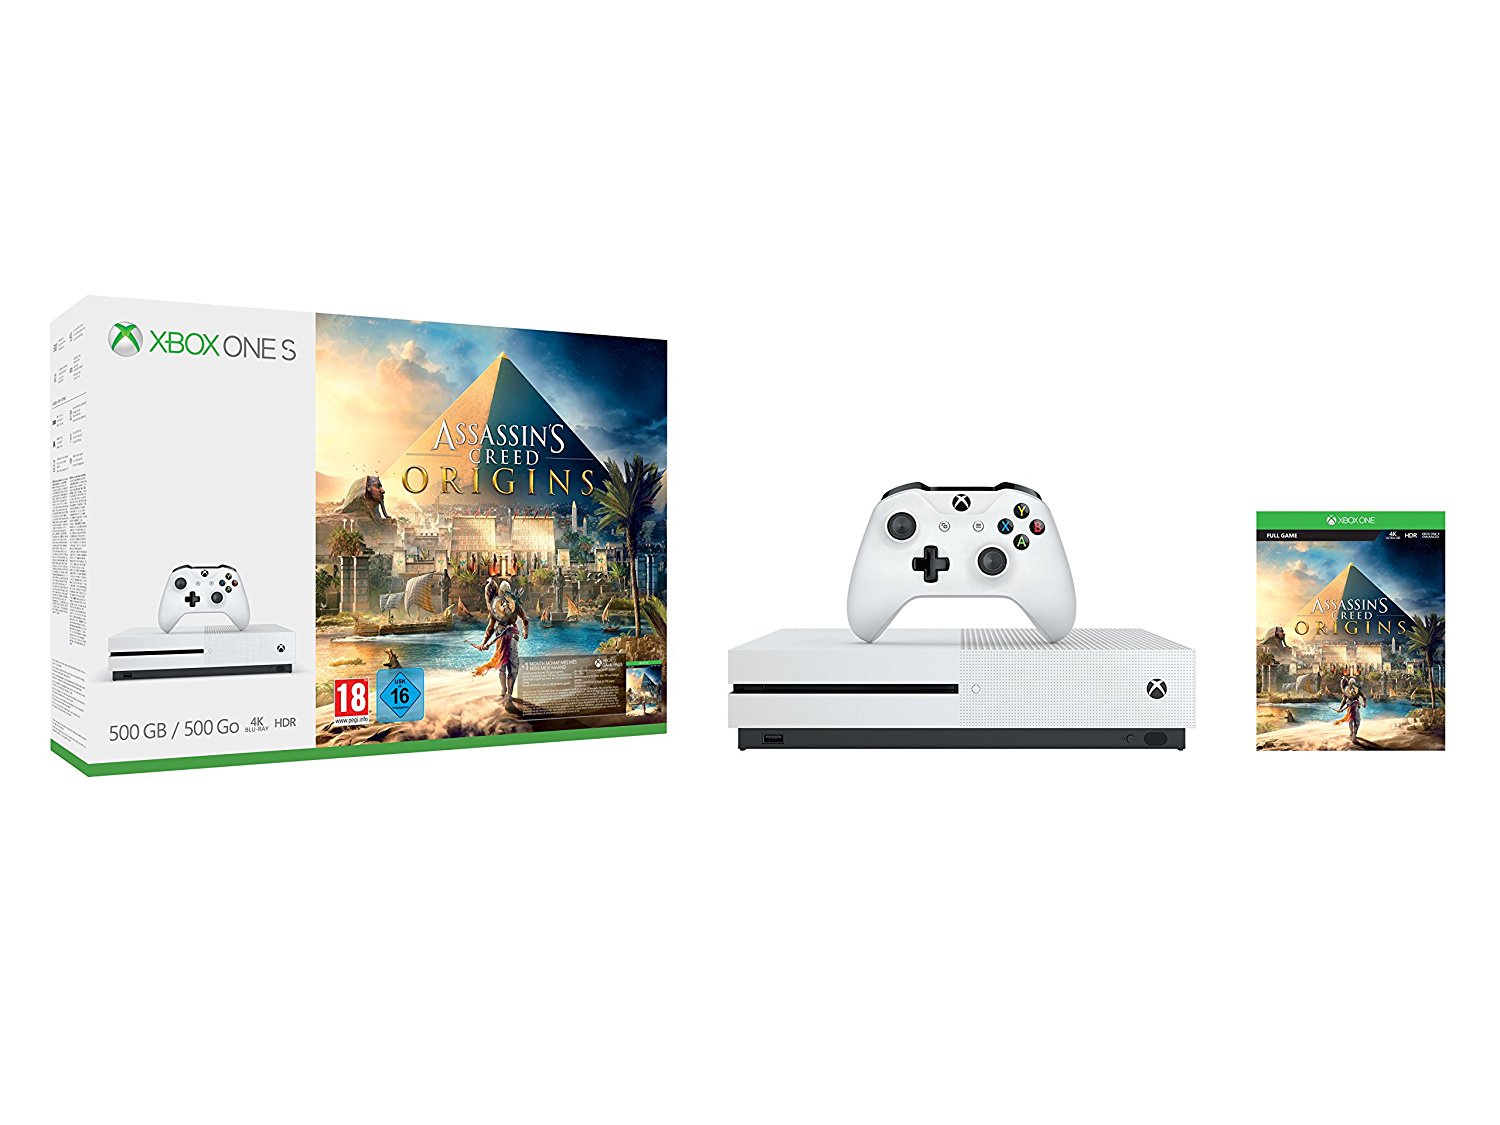 Pack Xbox One S 500 Go Assassin's Creed Origins, Console pas cher Amazon